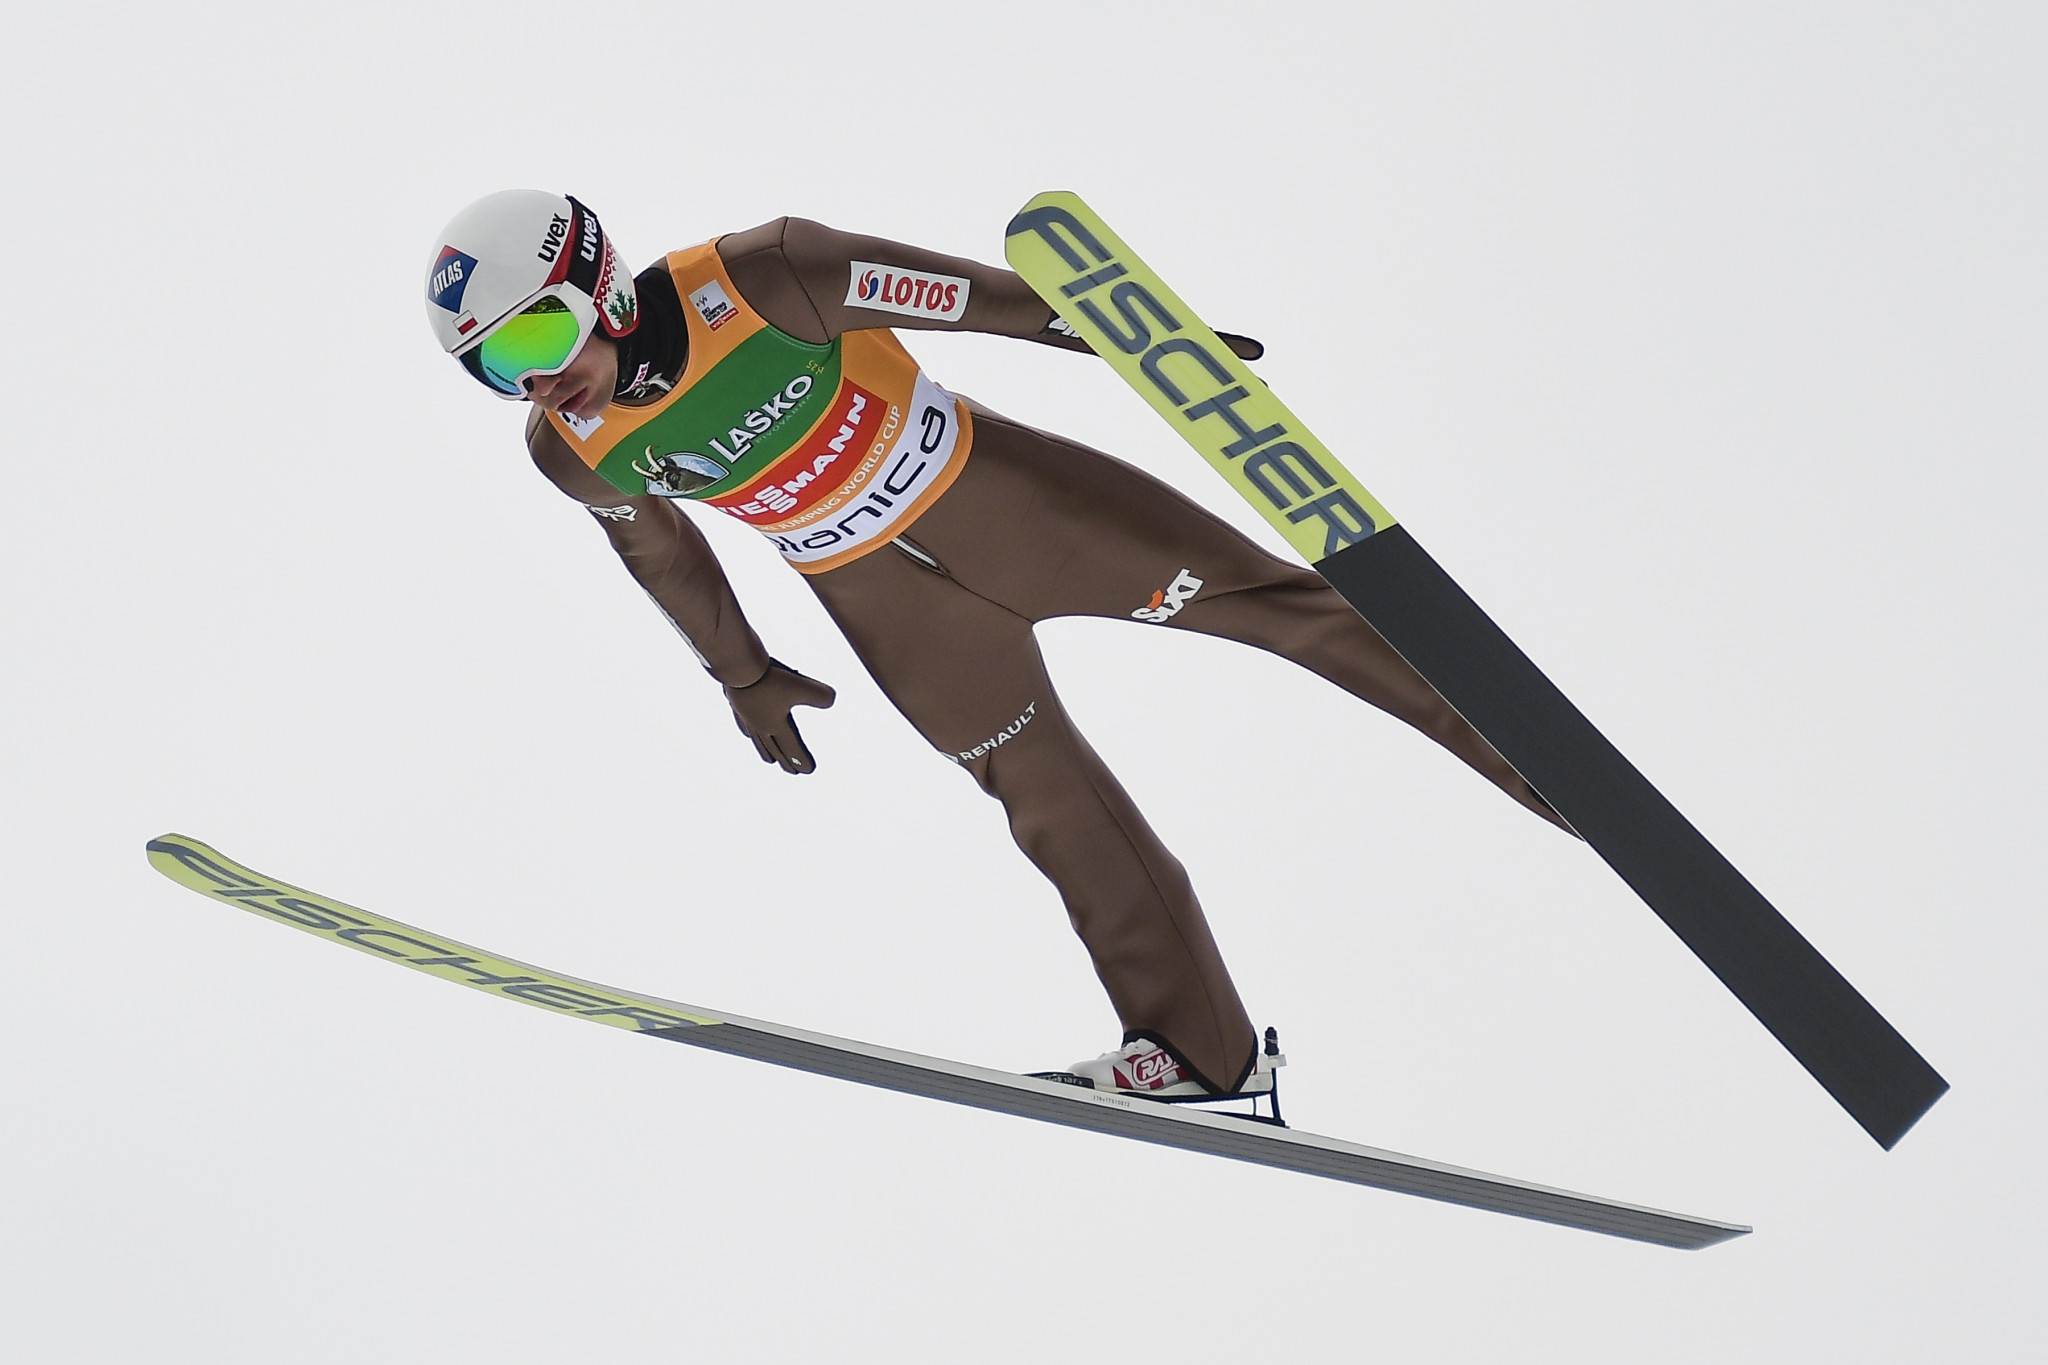 Poland's Olympic champion Kamil Stoch wlll start his pursuit of a third FIS World Cup Ski Jump title at the home venue of Wisla this weekend ©Getty Images  